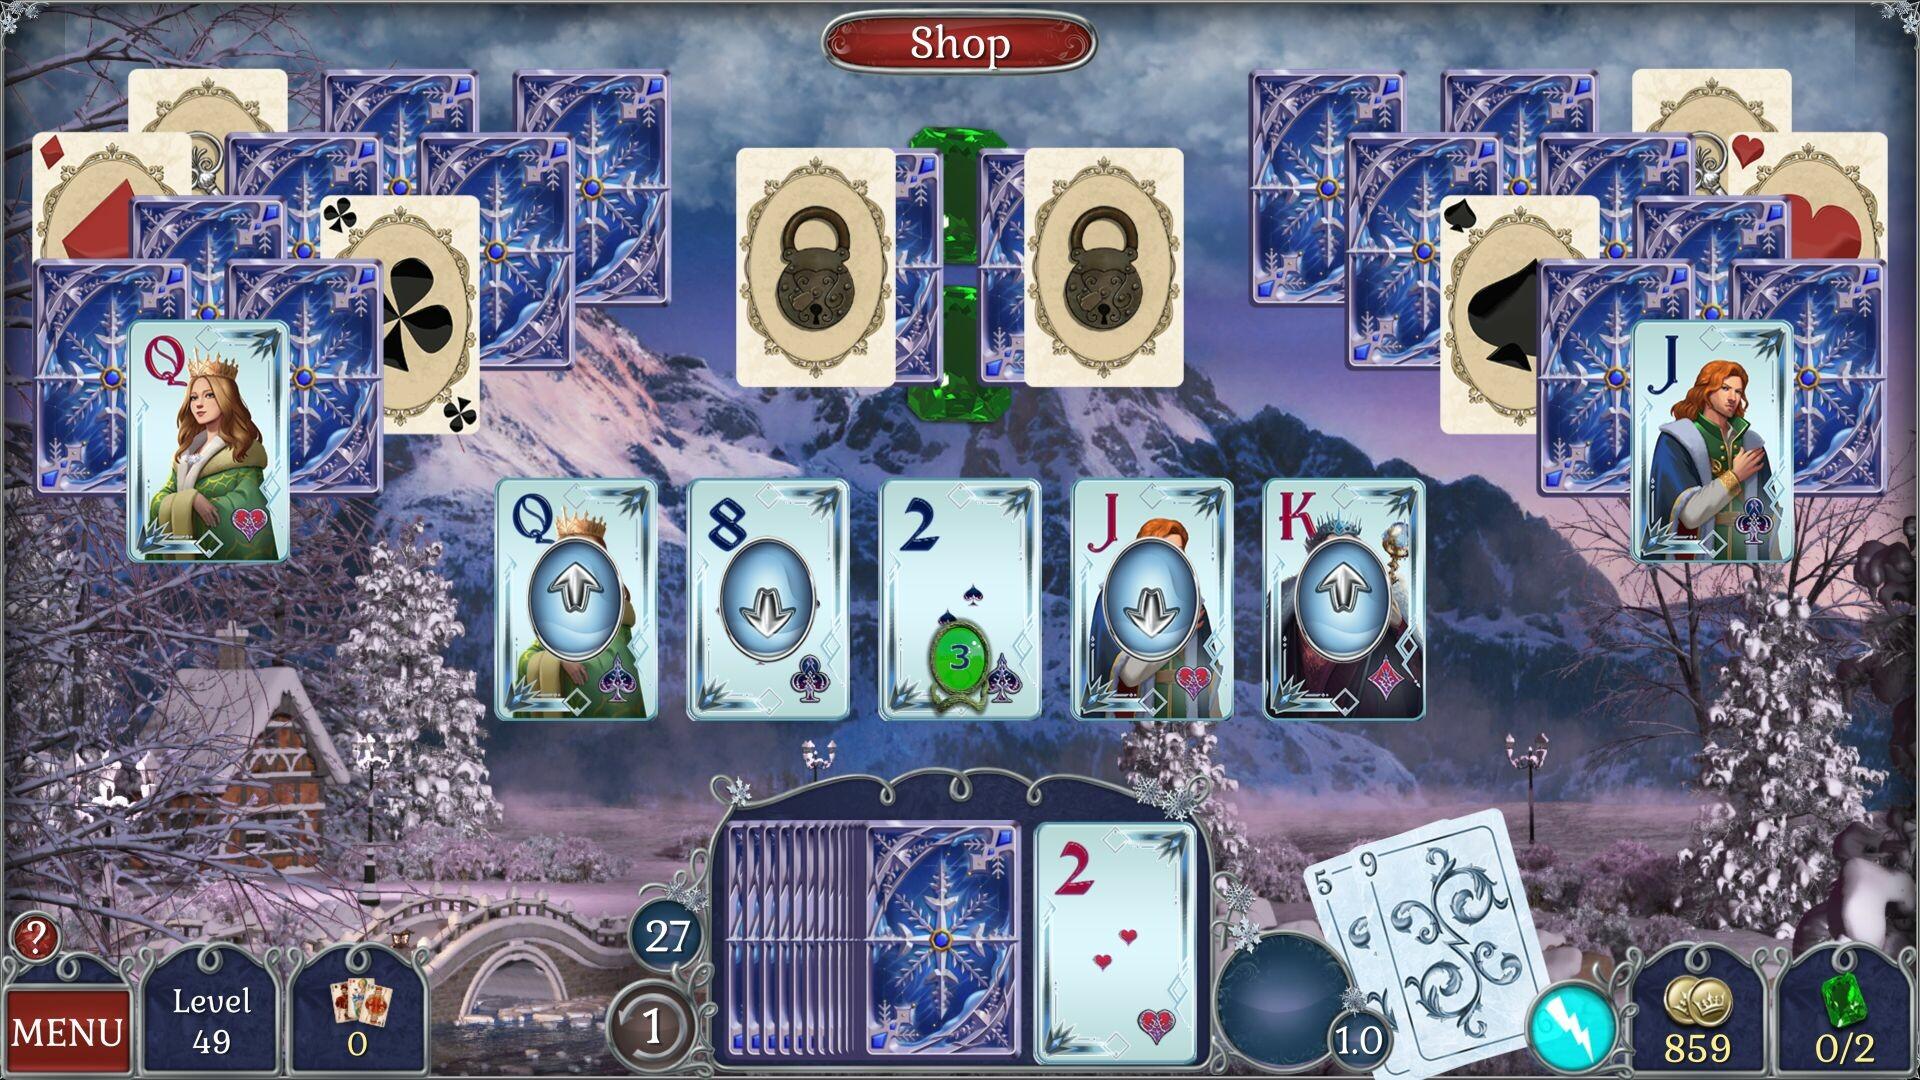 Screenshot of Jewel Match Solitaire Winterscapes 2 - Collector's Edition